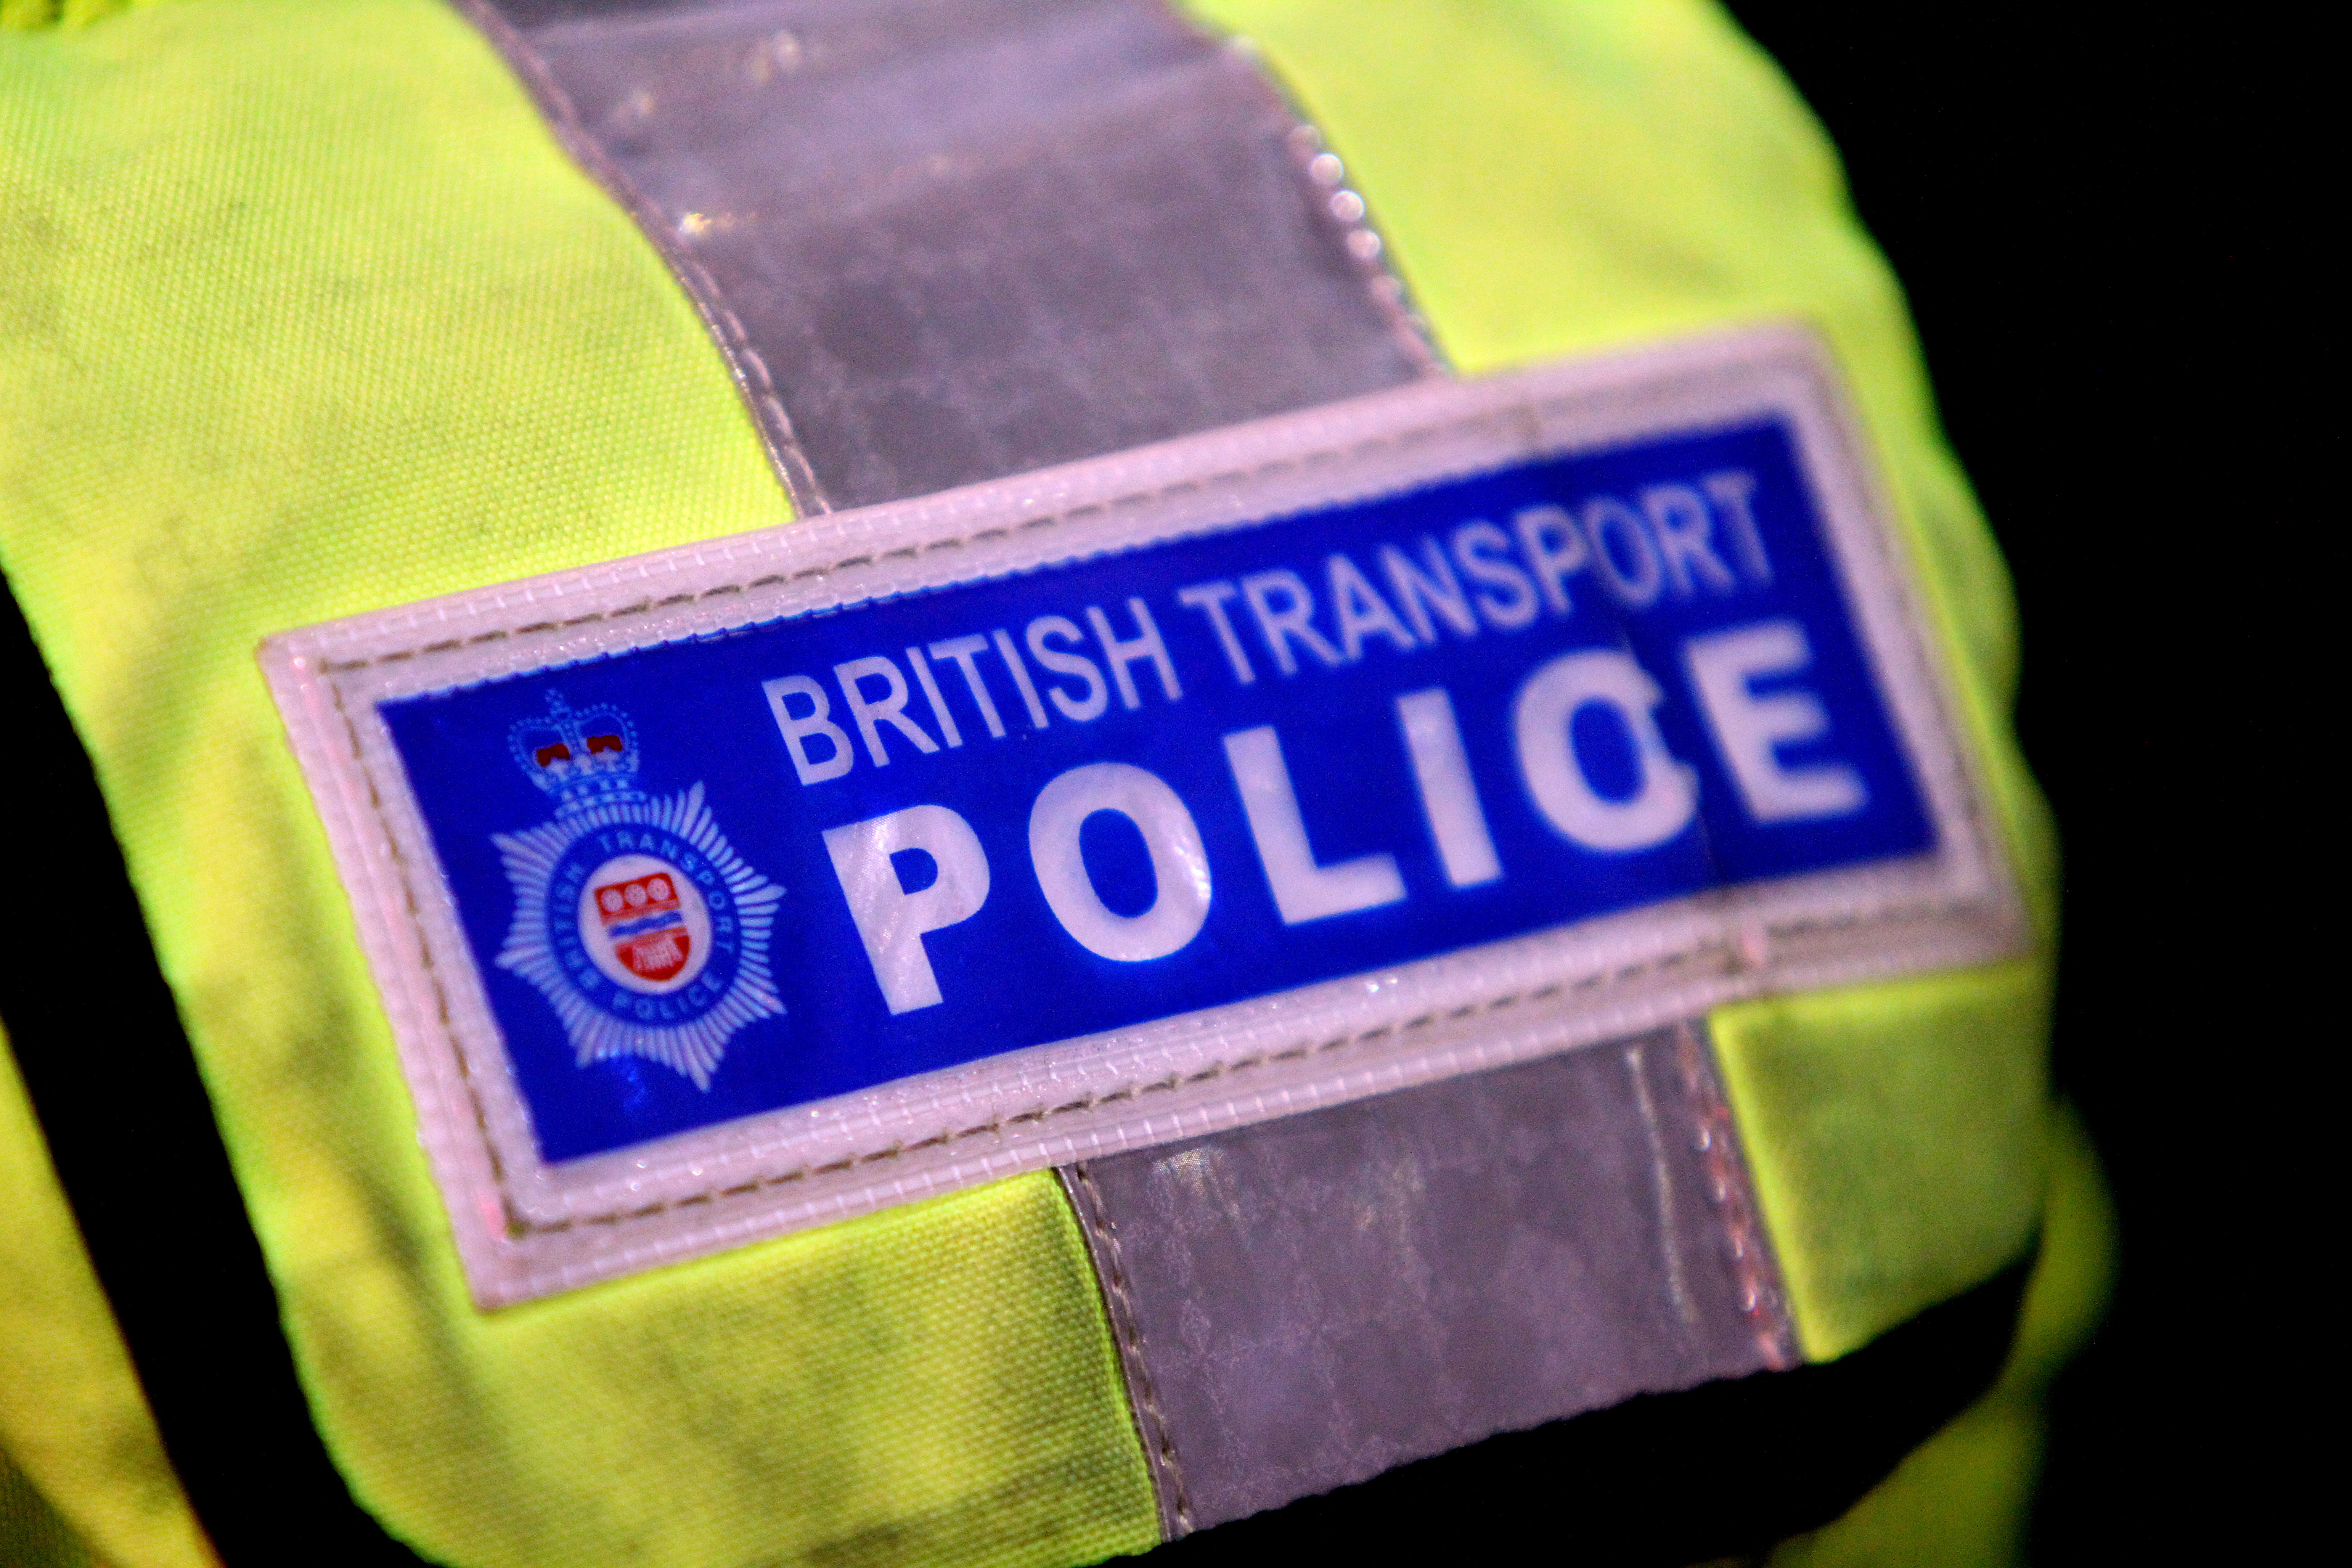 The women were assaulted on the train between Kilmarnock and Glasgow Central.